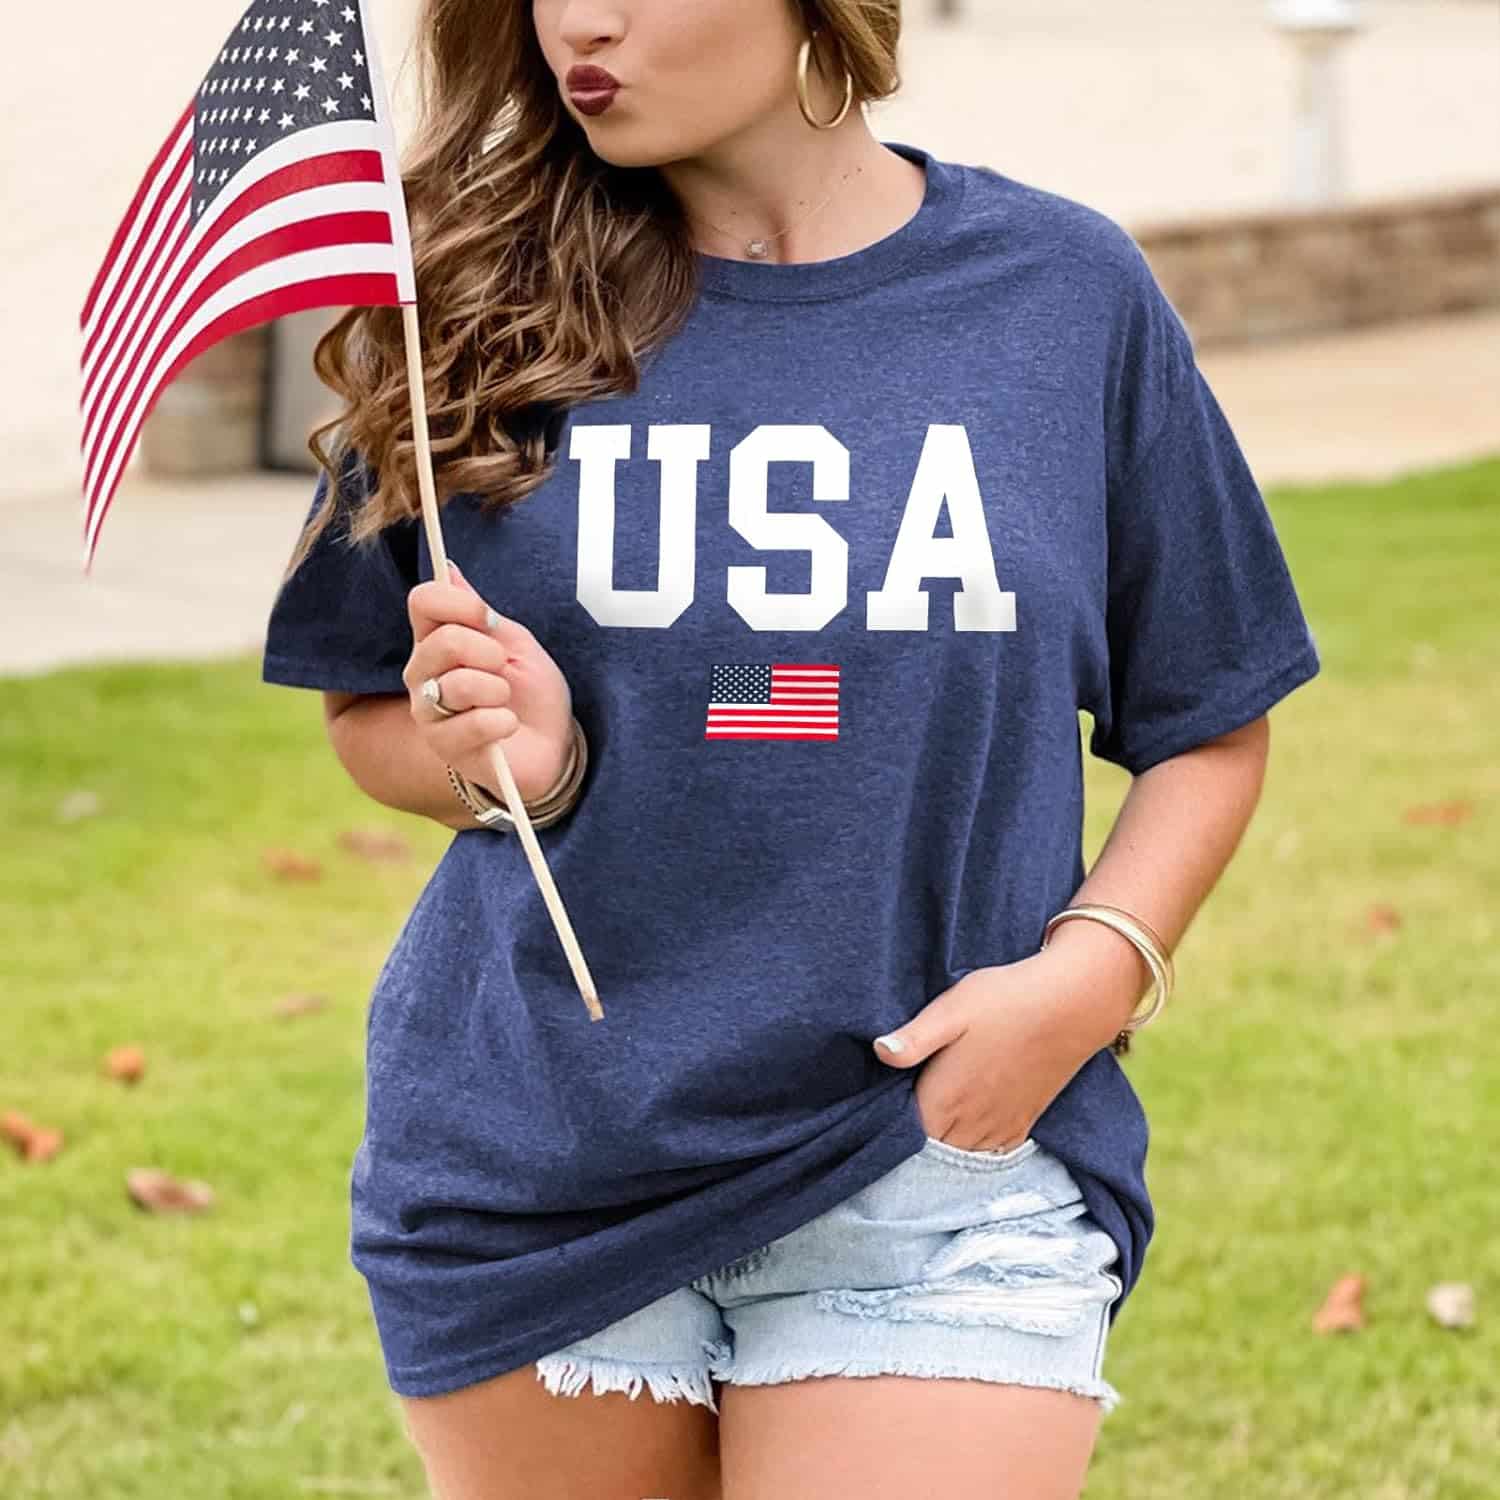 Plus Size USA Flag Shirt for Women 4th of July: A Patriotic Fashion Statement